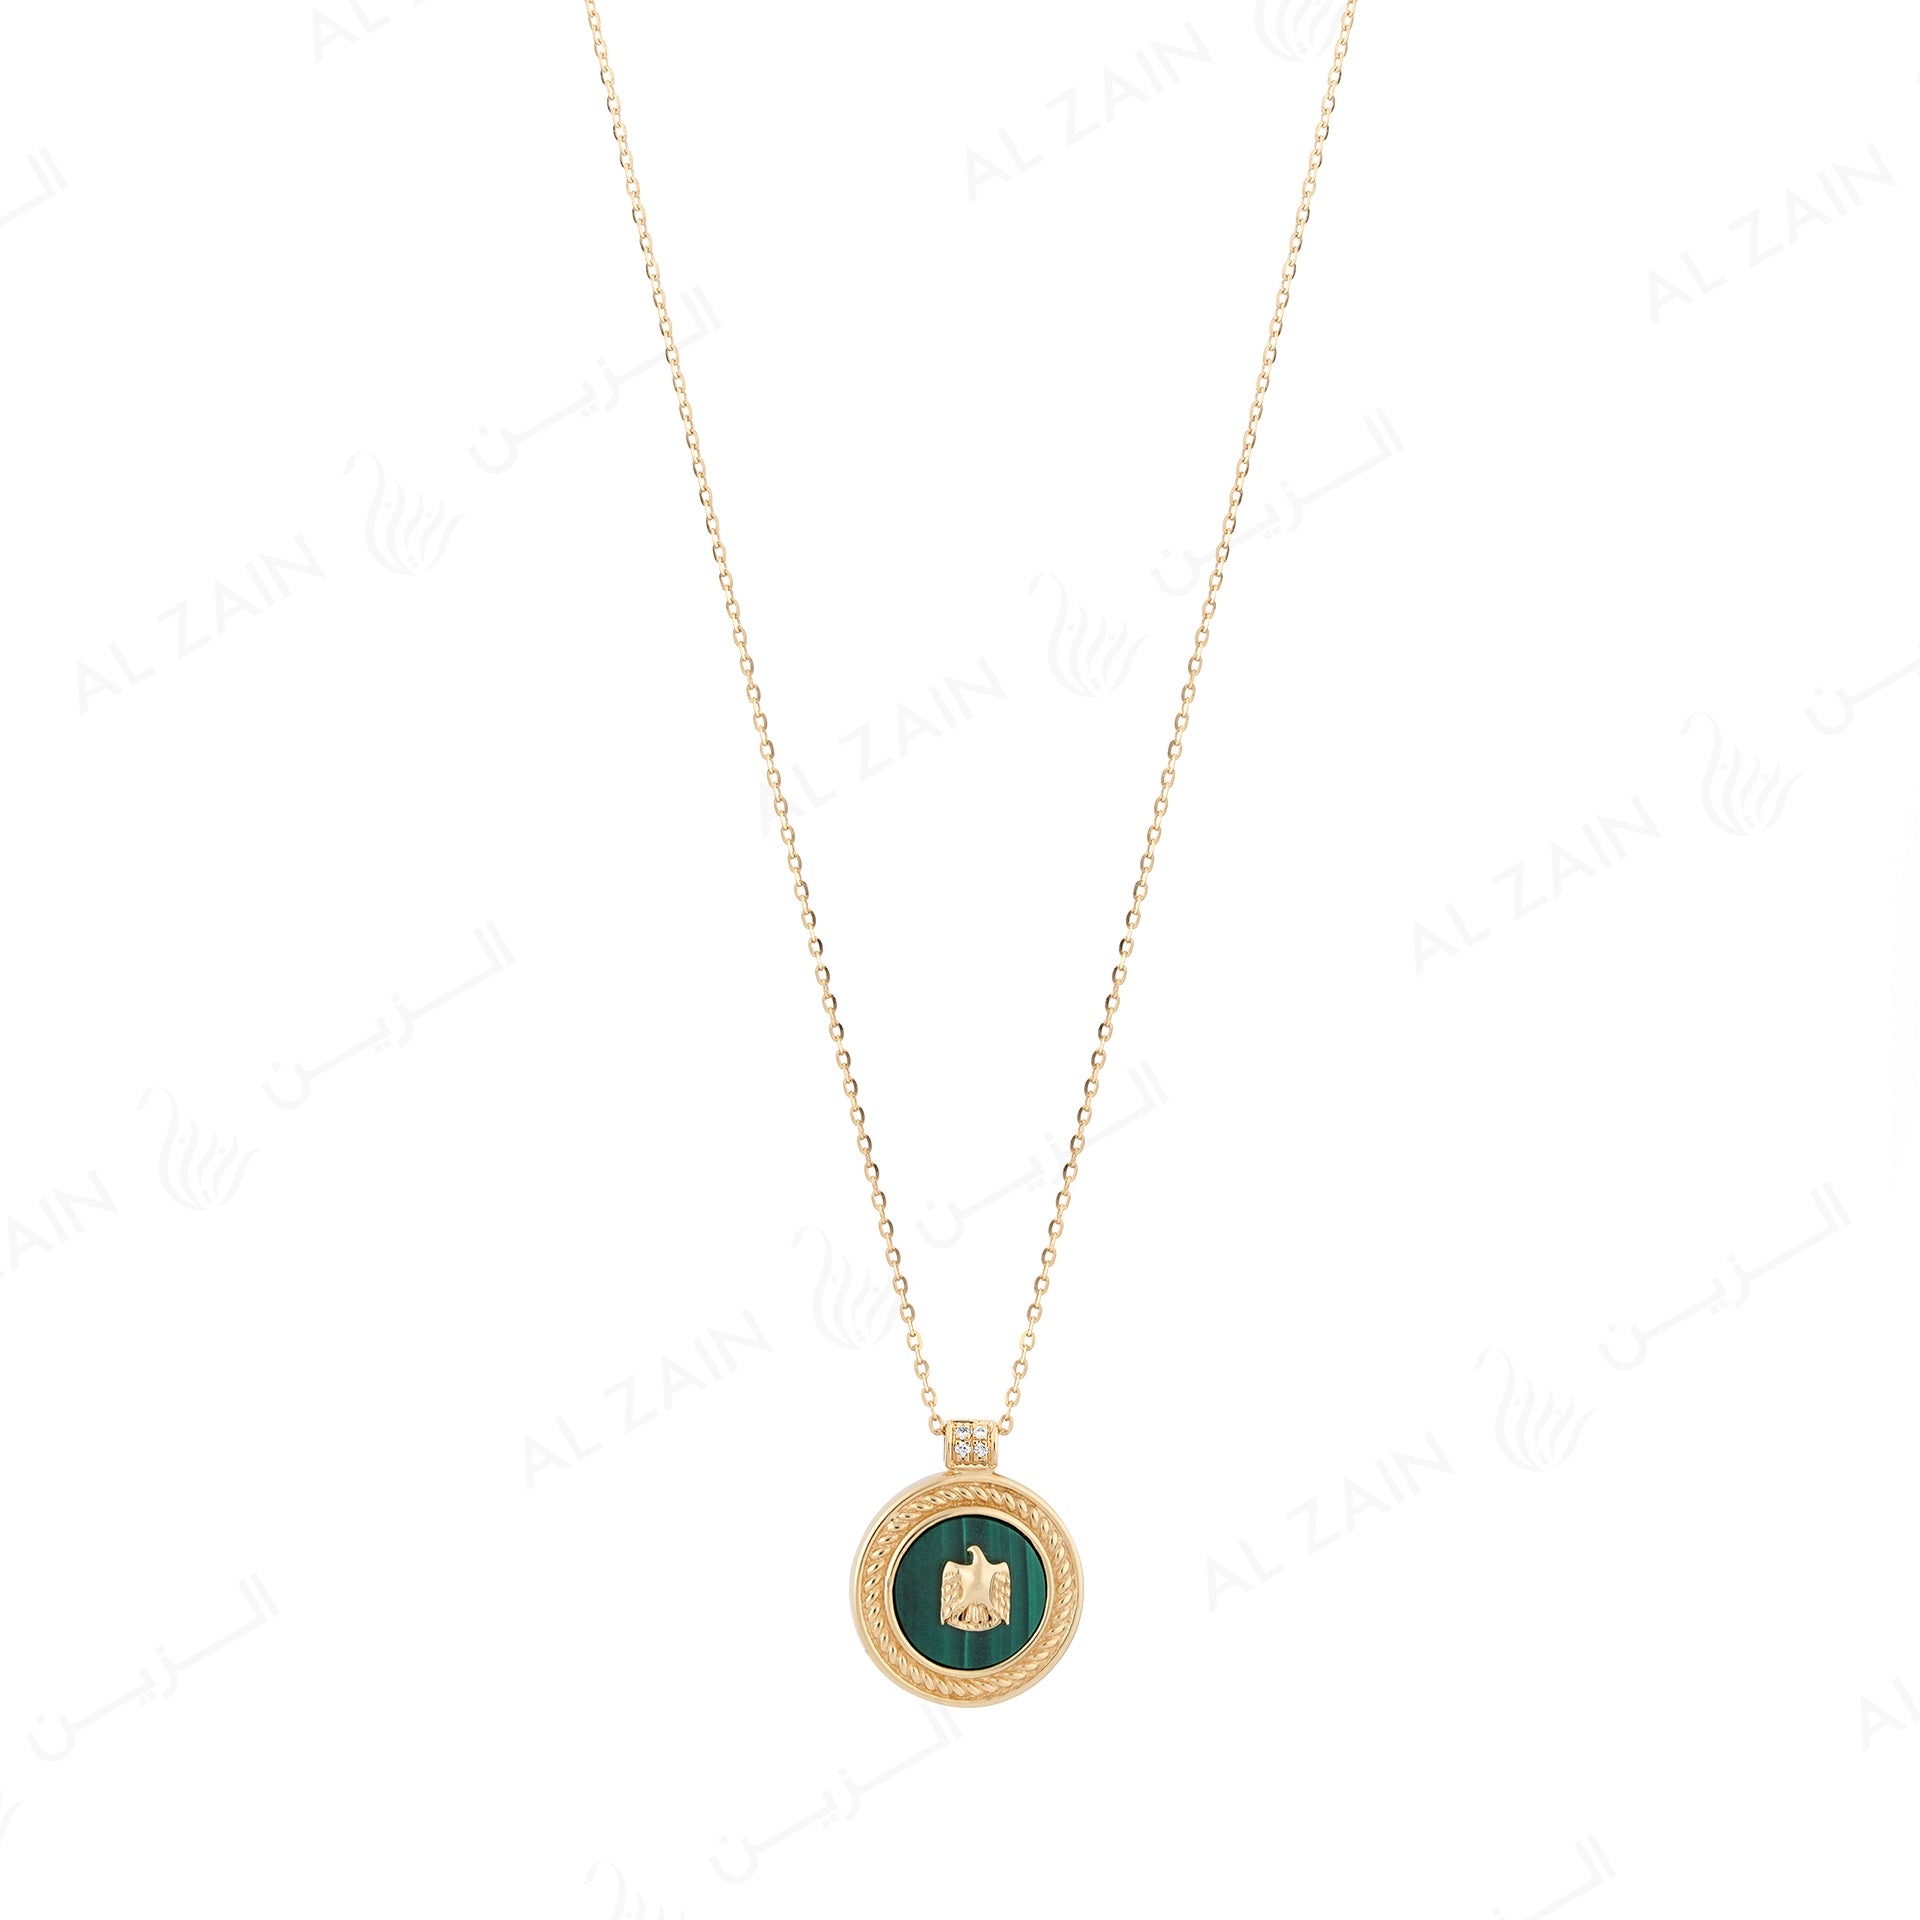 UAE Necklace in 18k yellow gold with Malachite Stone and Diamonds